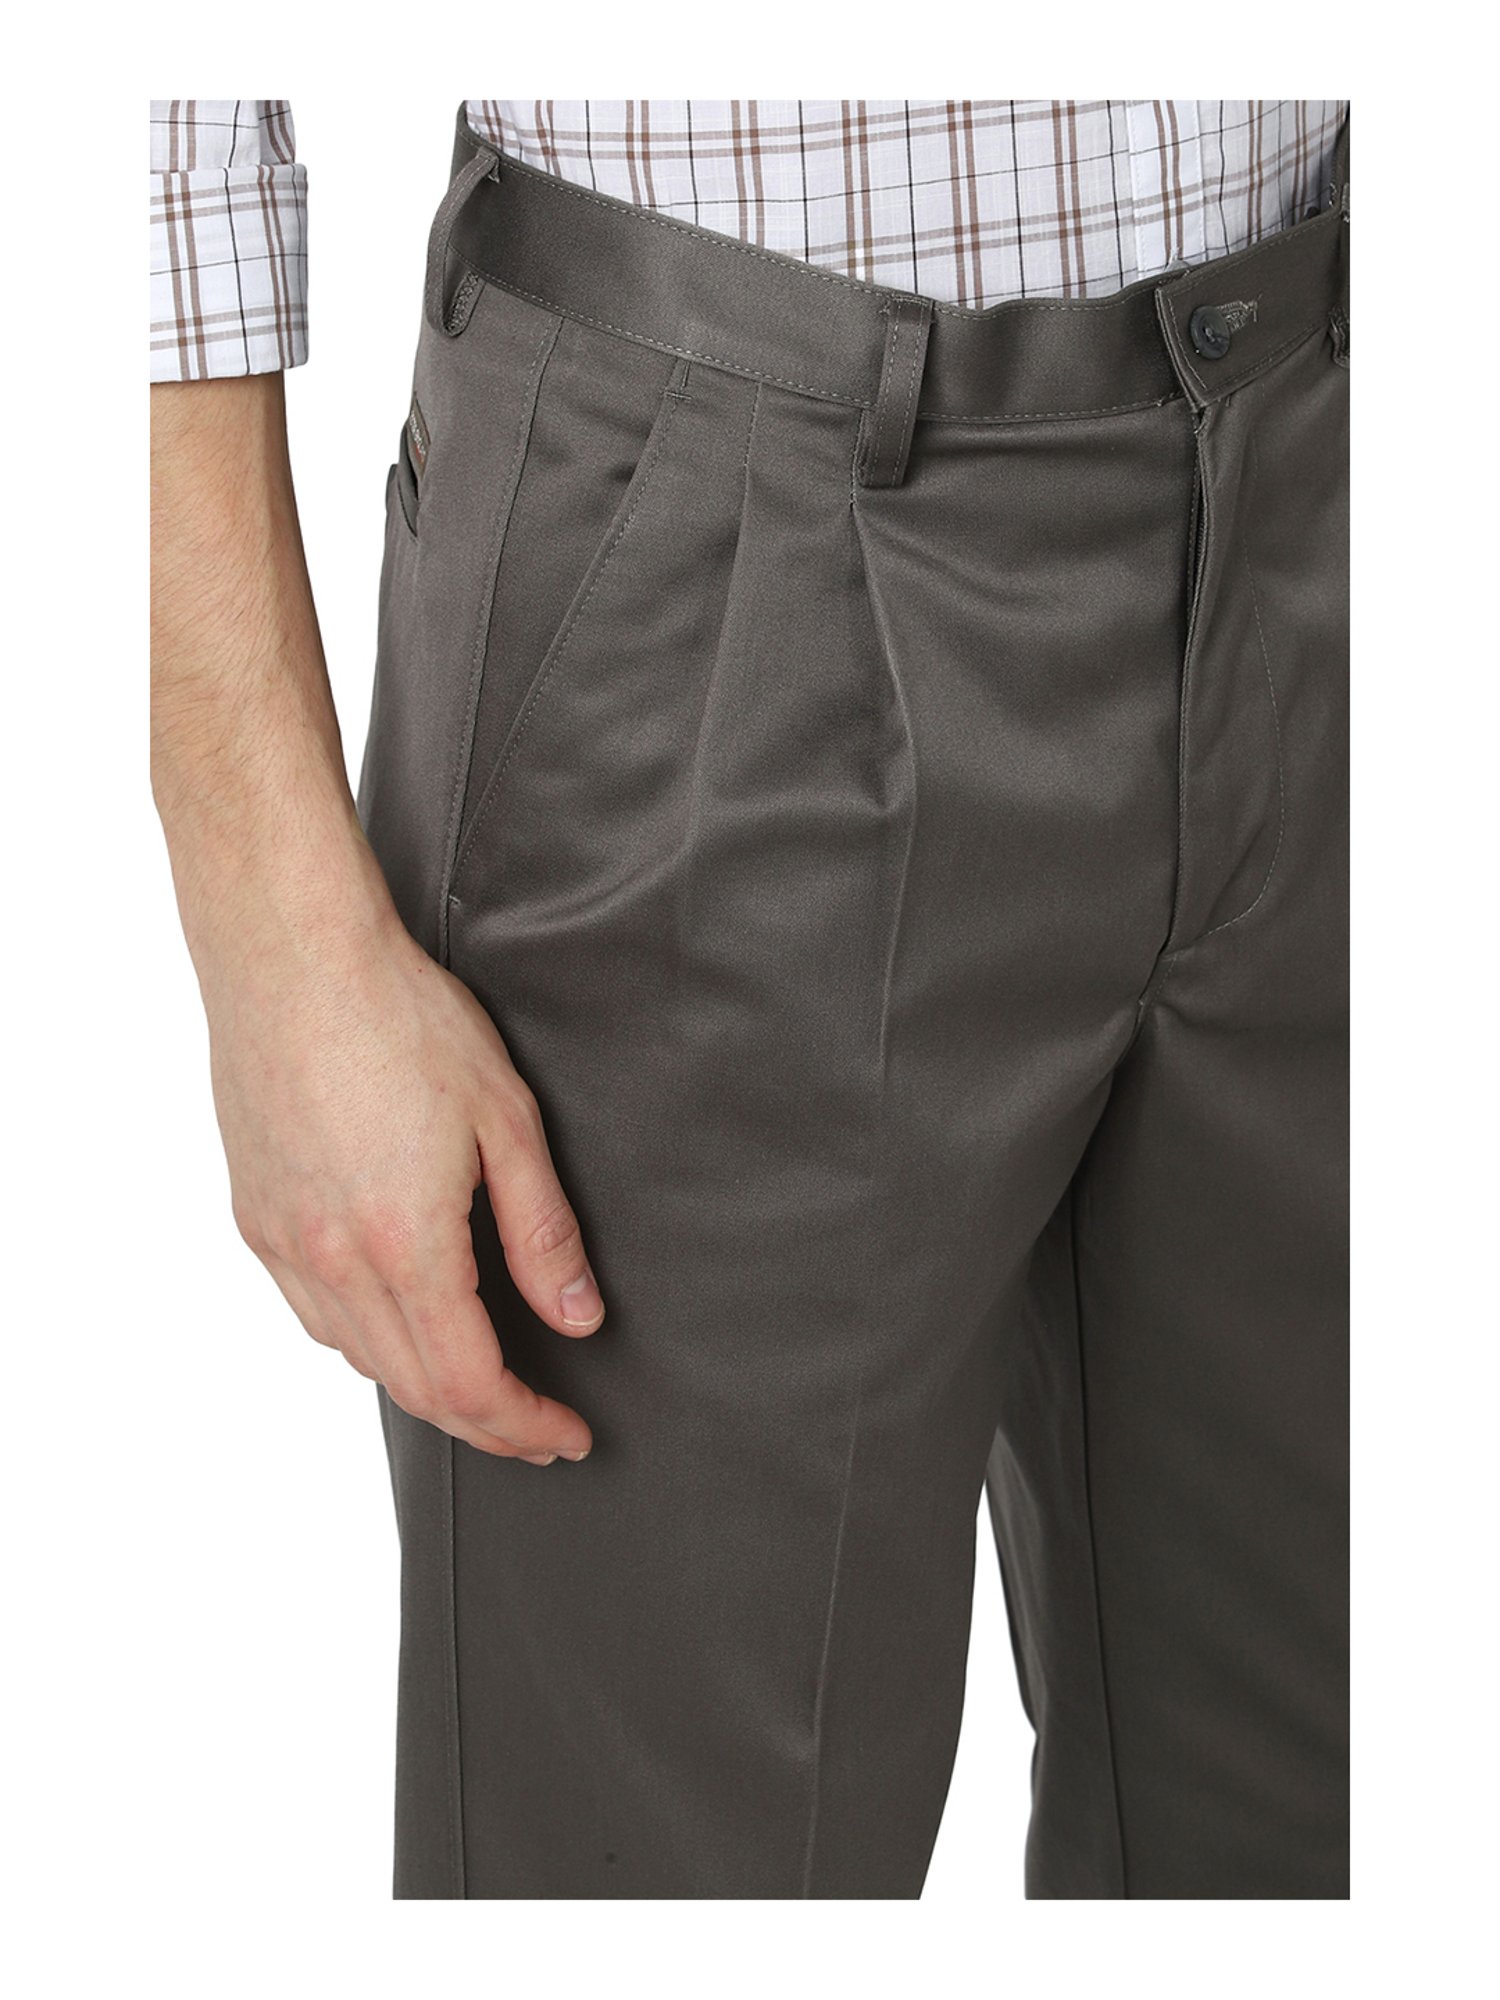 Peter England Formal Trousers & Hight Waist Pants for Men sale - discounted  price | FASHIOLA INDIA